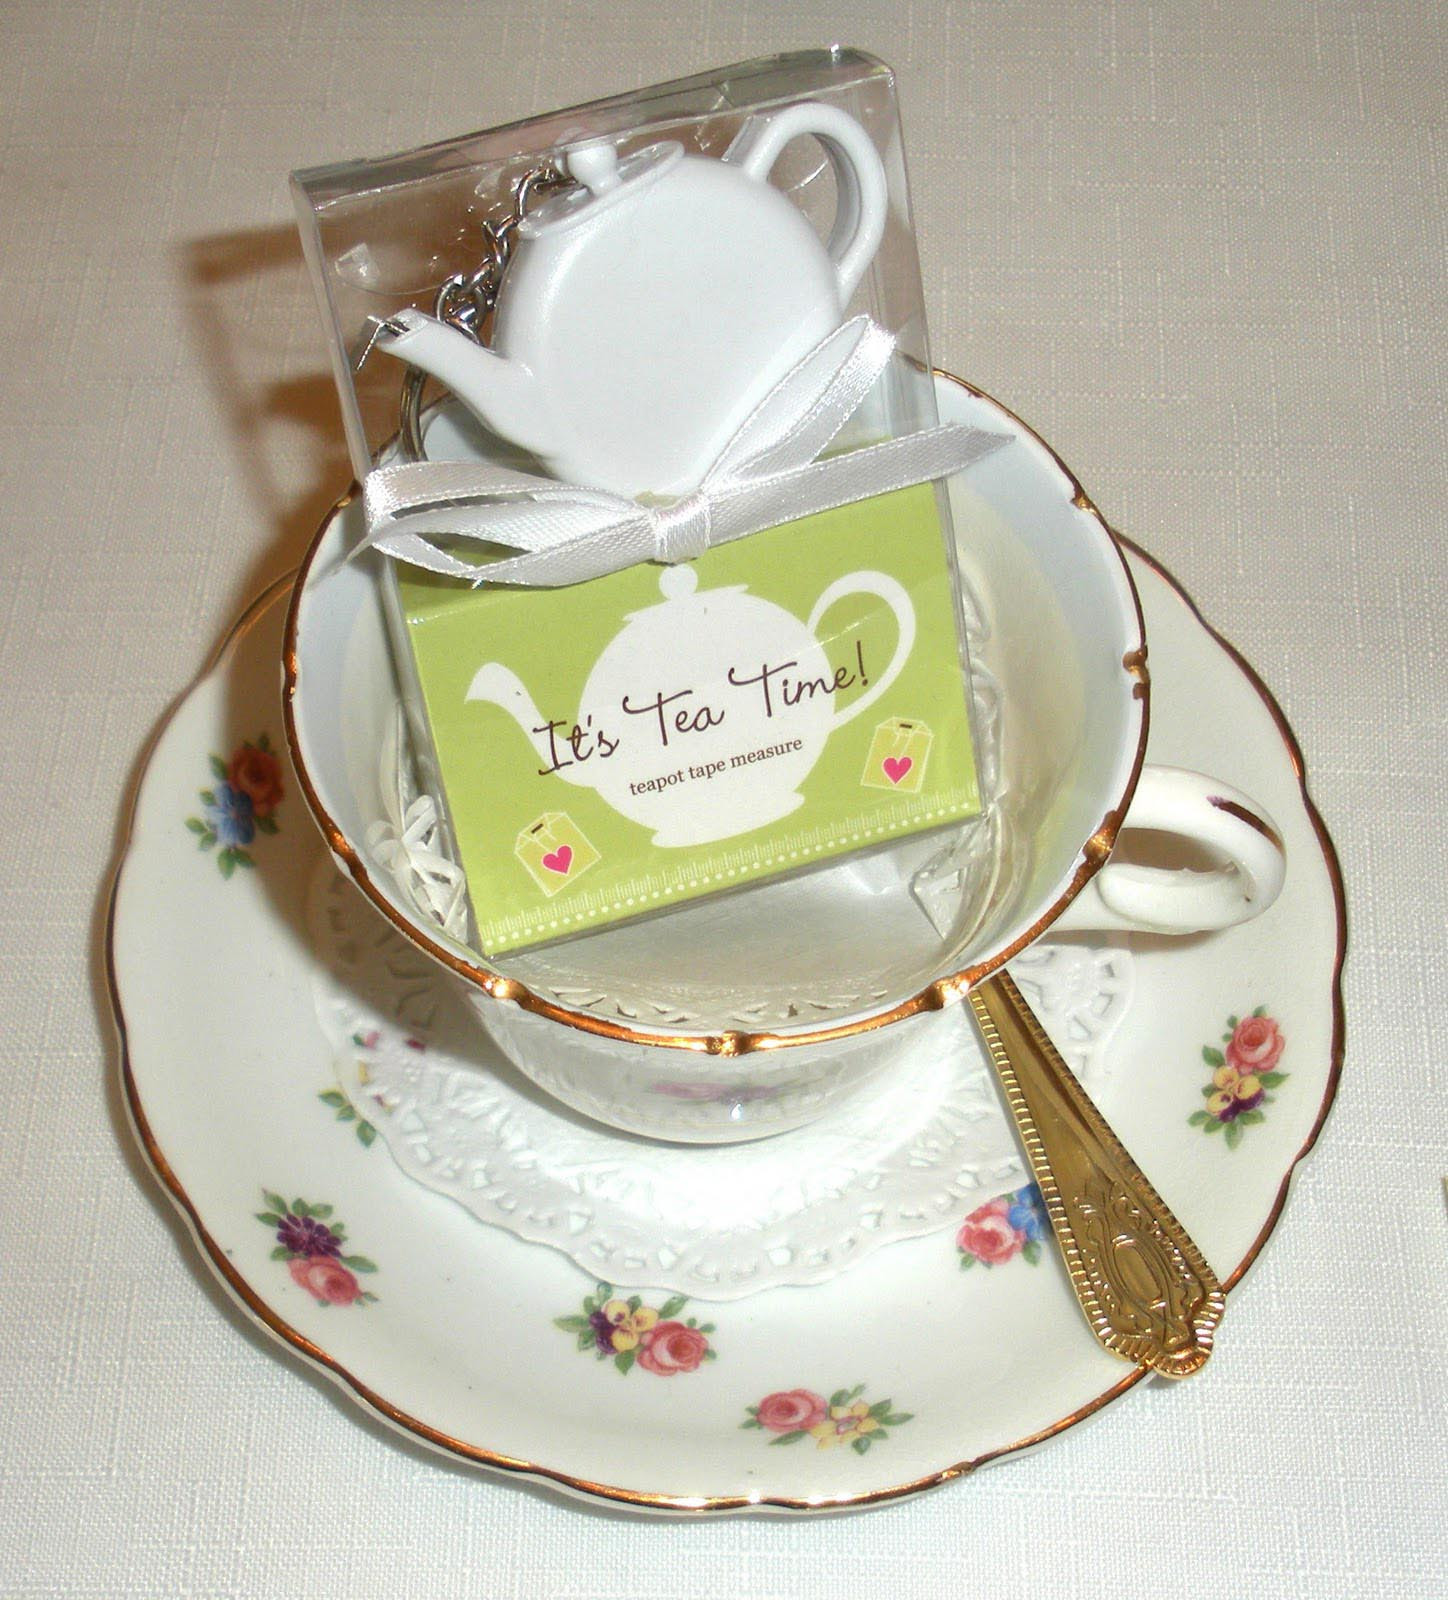 Tea Party Favor Ideas For Adults
 Afternoon Tea Party Favors